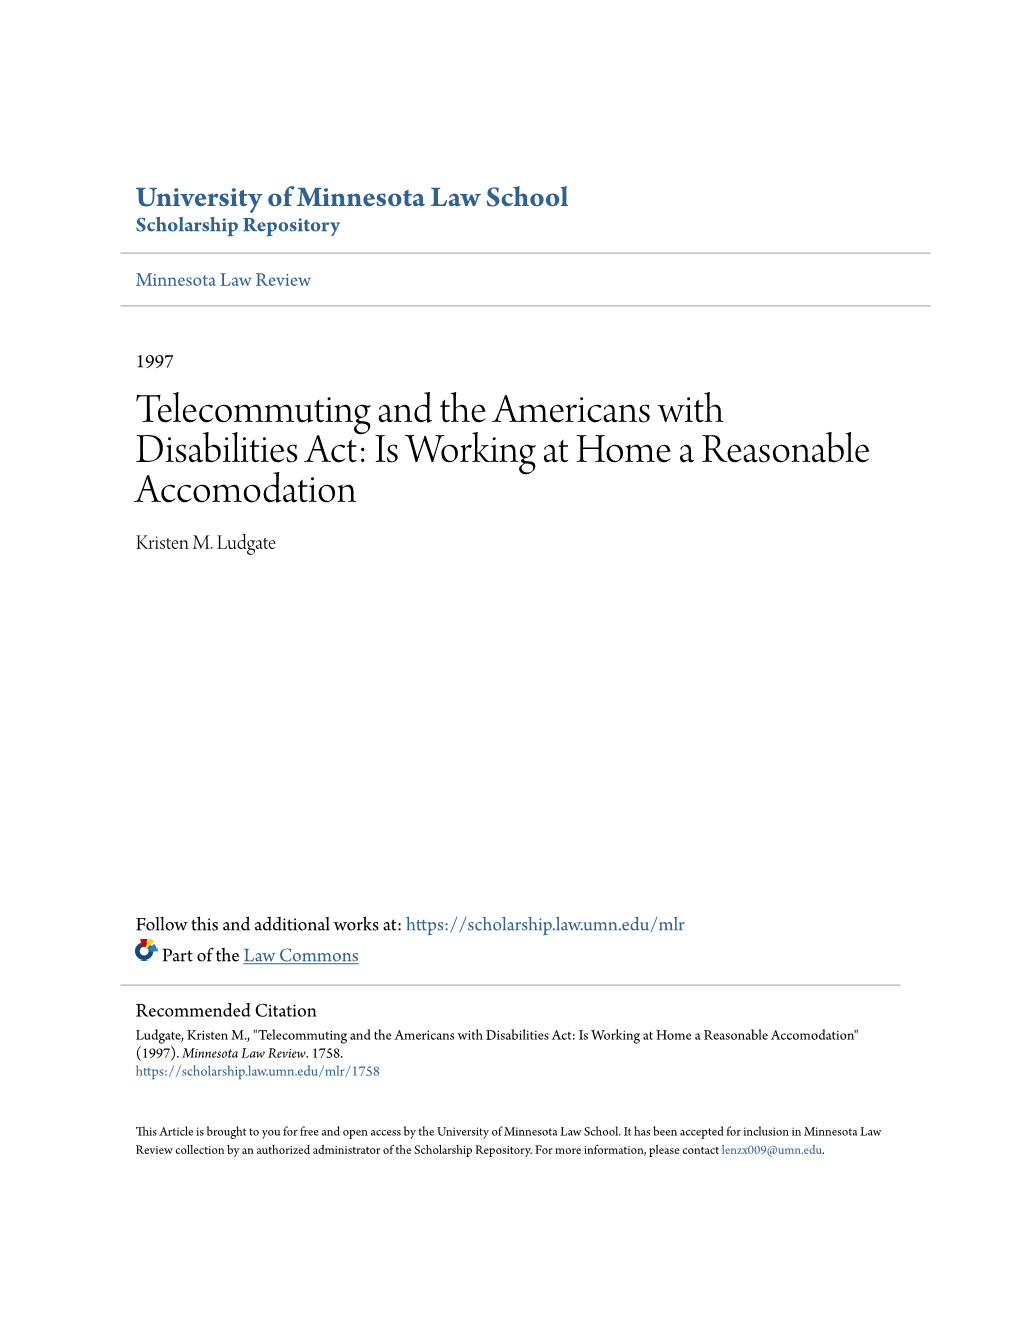 Telecommuting and the Americans with Disabilities Act: Is Working at Home a Reasonable Accomodation Kristen M